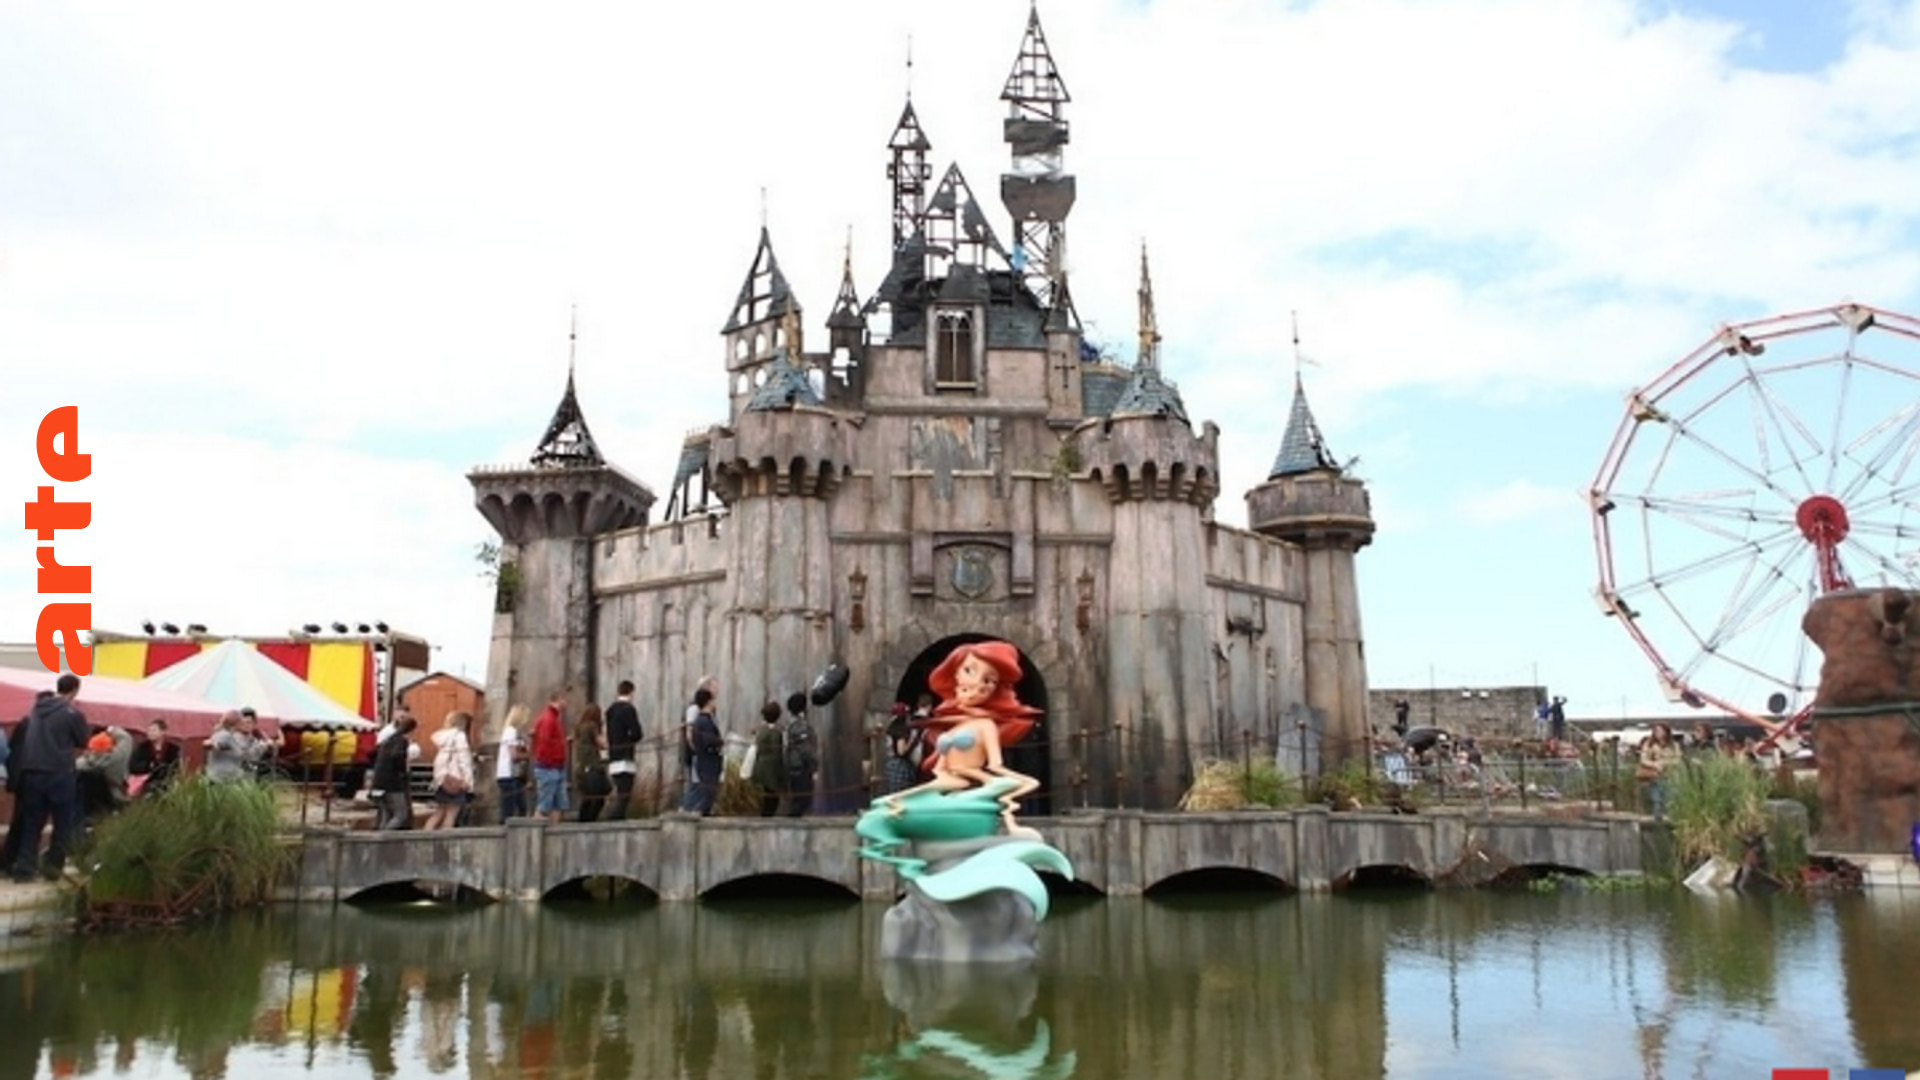 One day in Dismaland